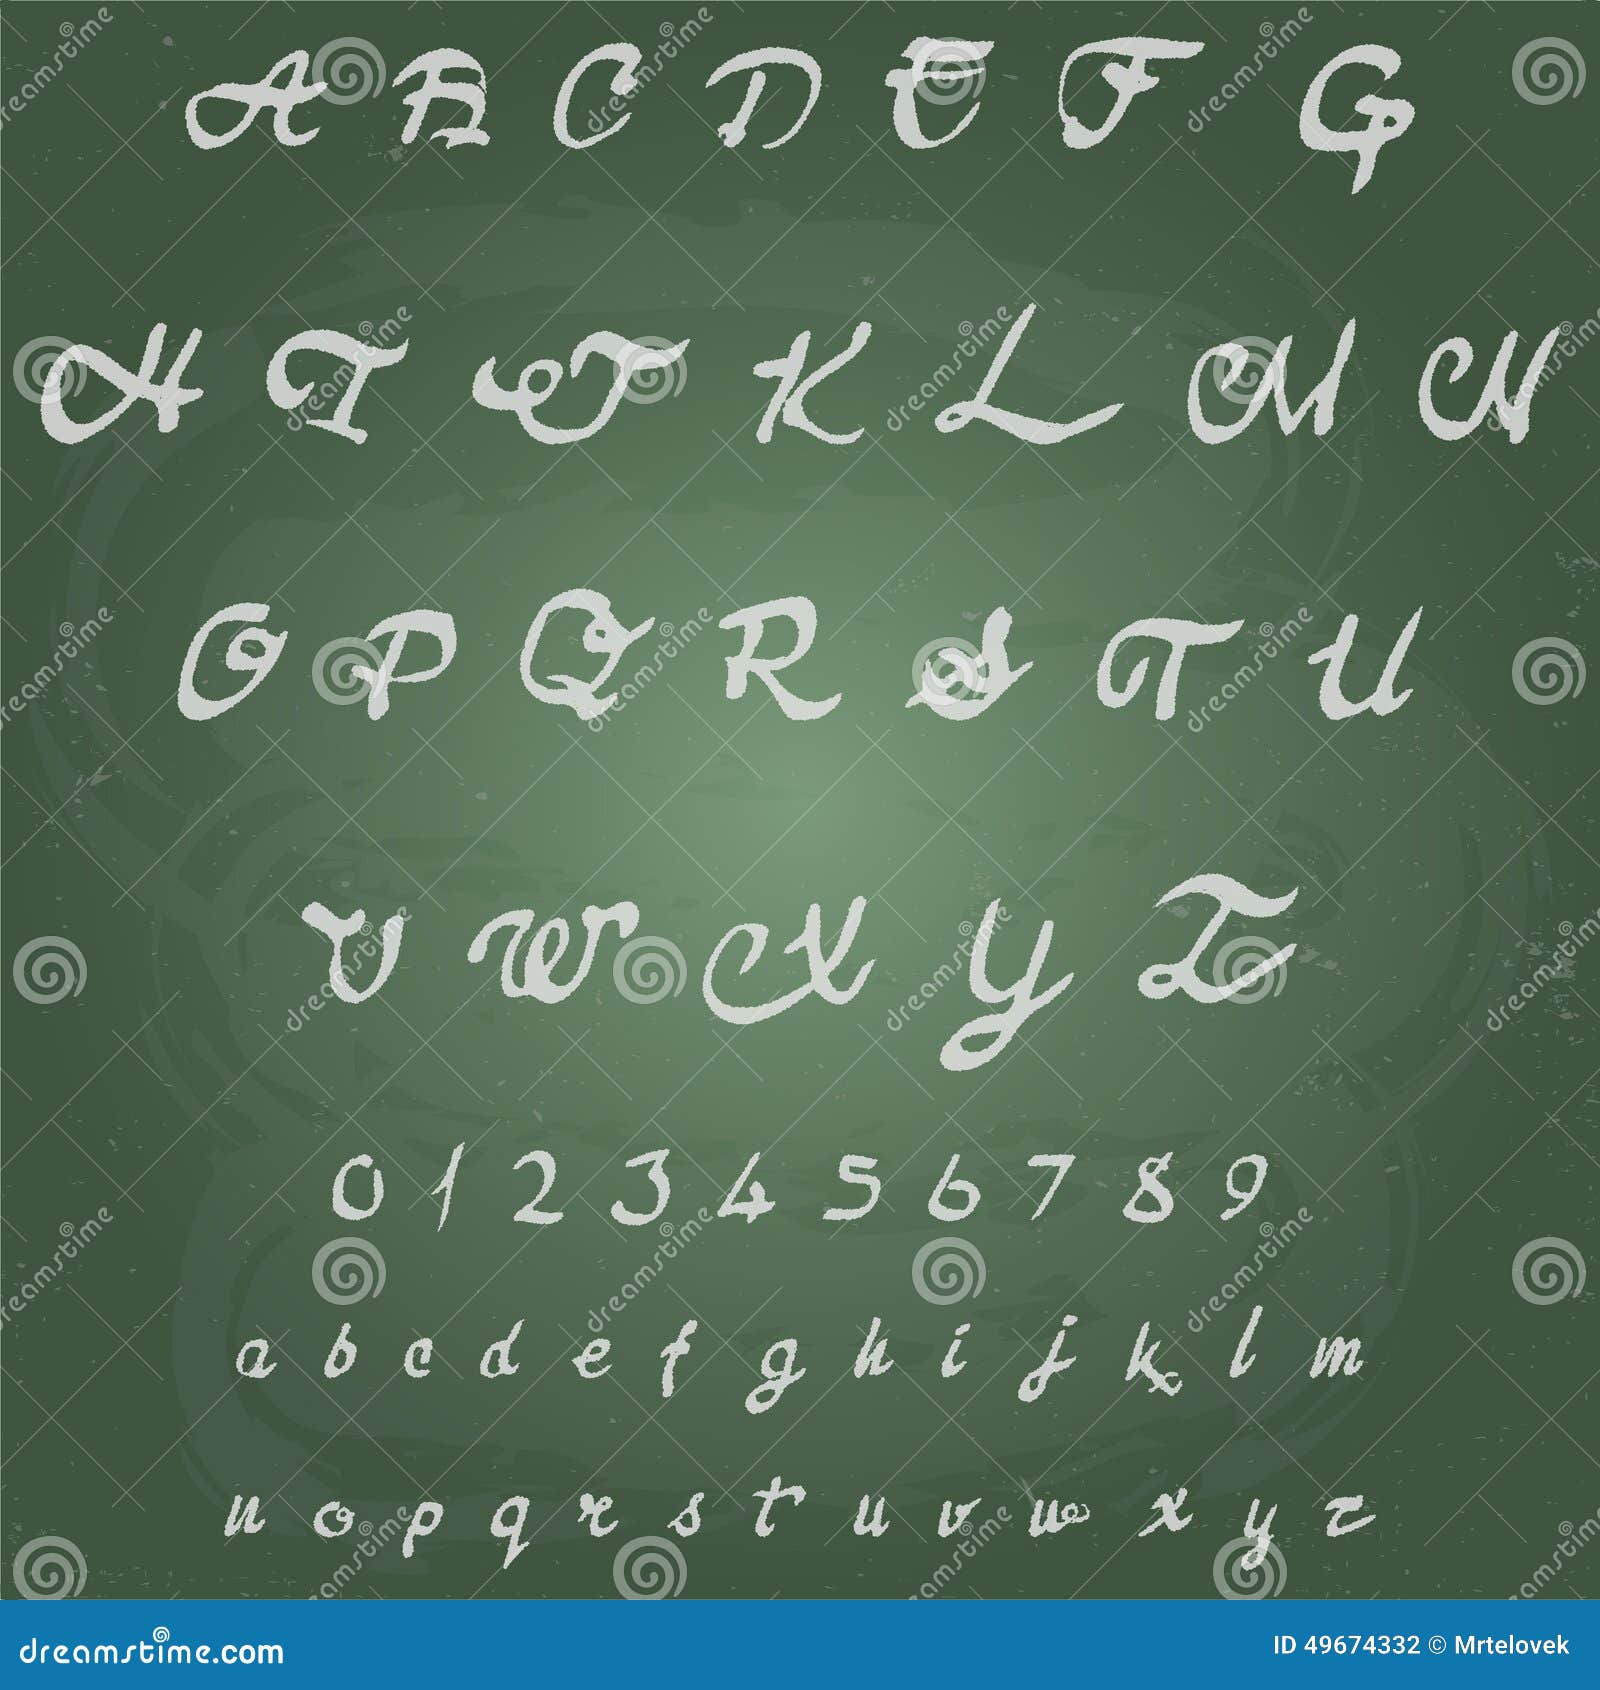 Drawn on a Blackboard Alphabet and Numbers with Stock Vector ...